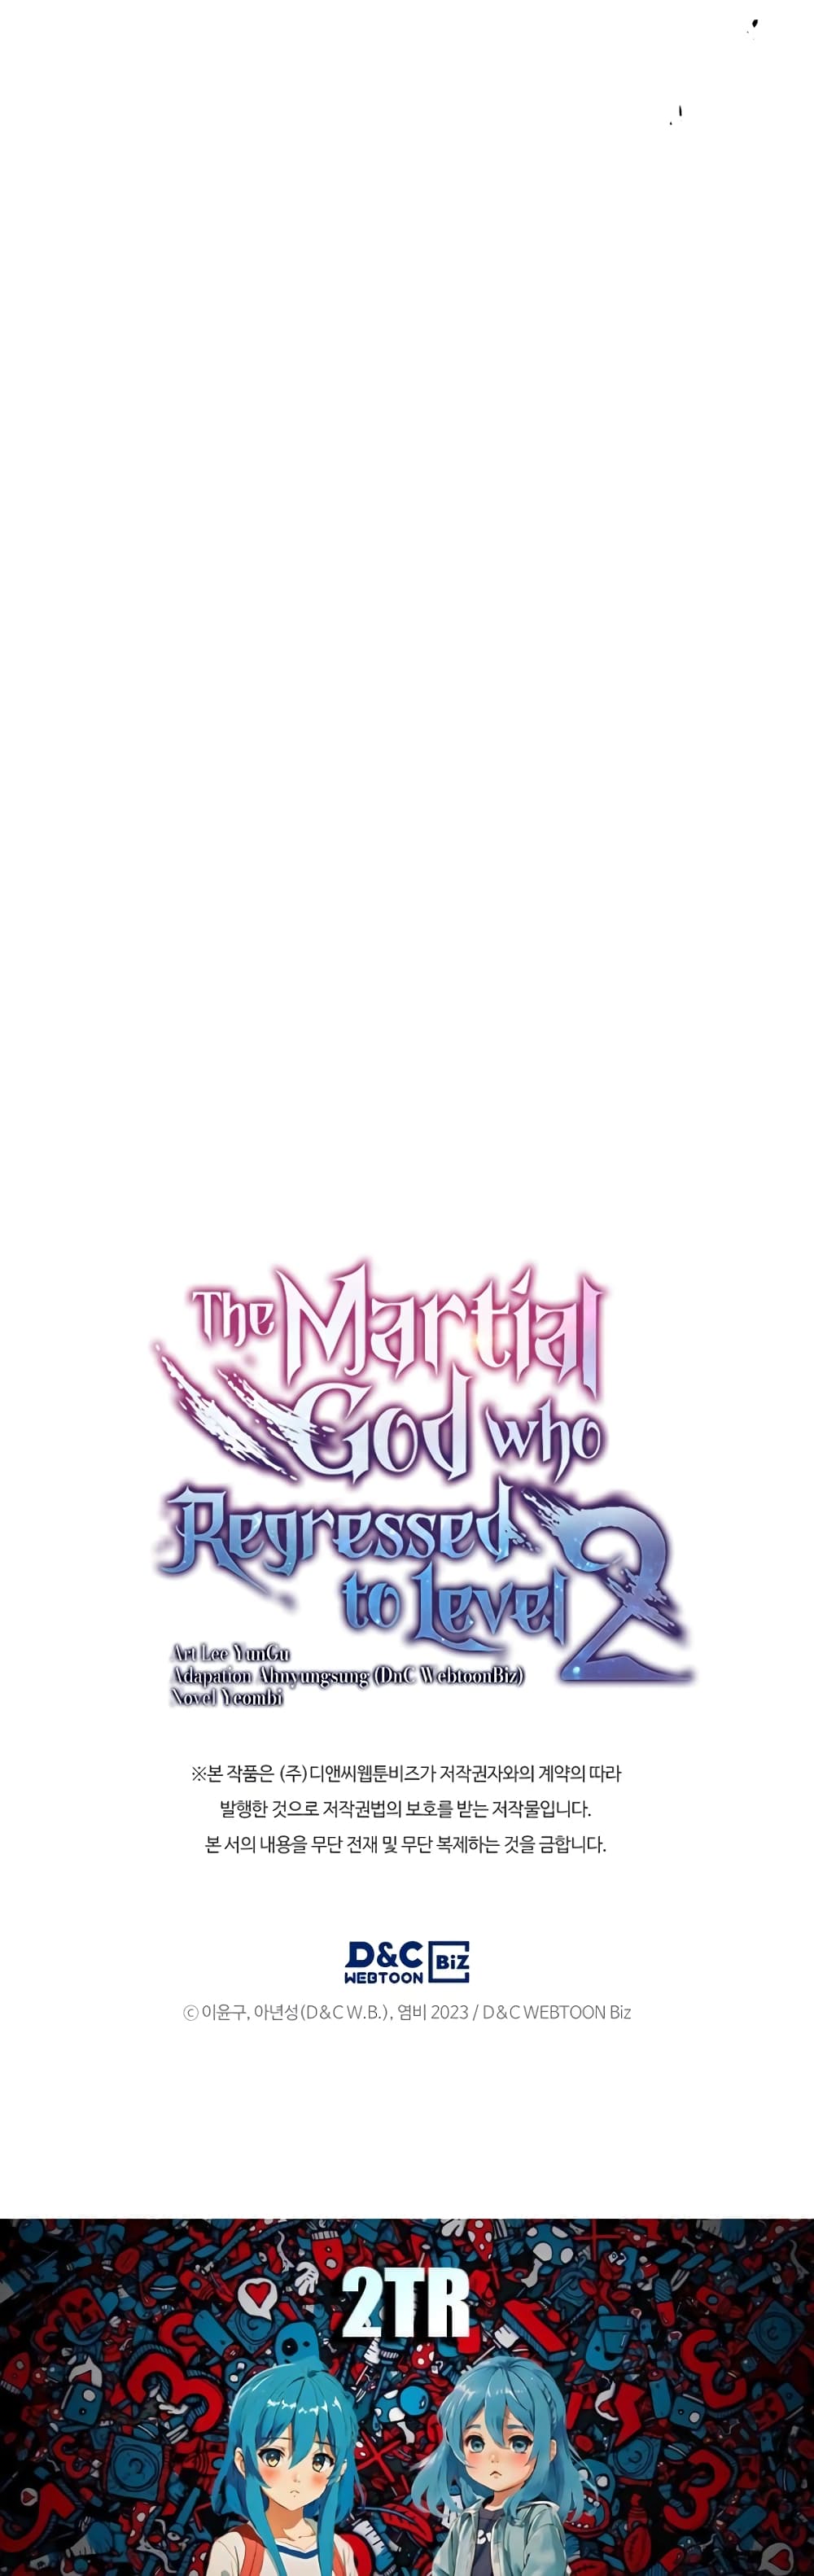 Martial God Regressed to Level 2 21-21